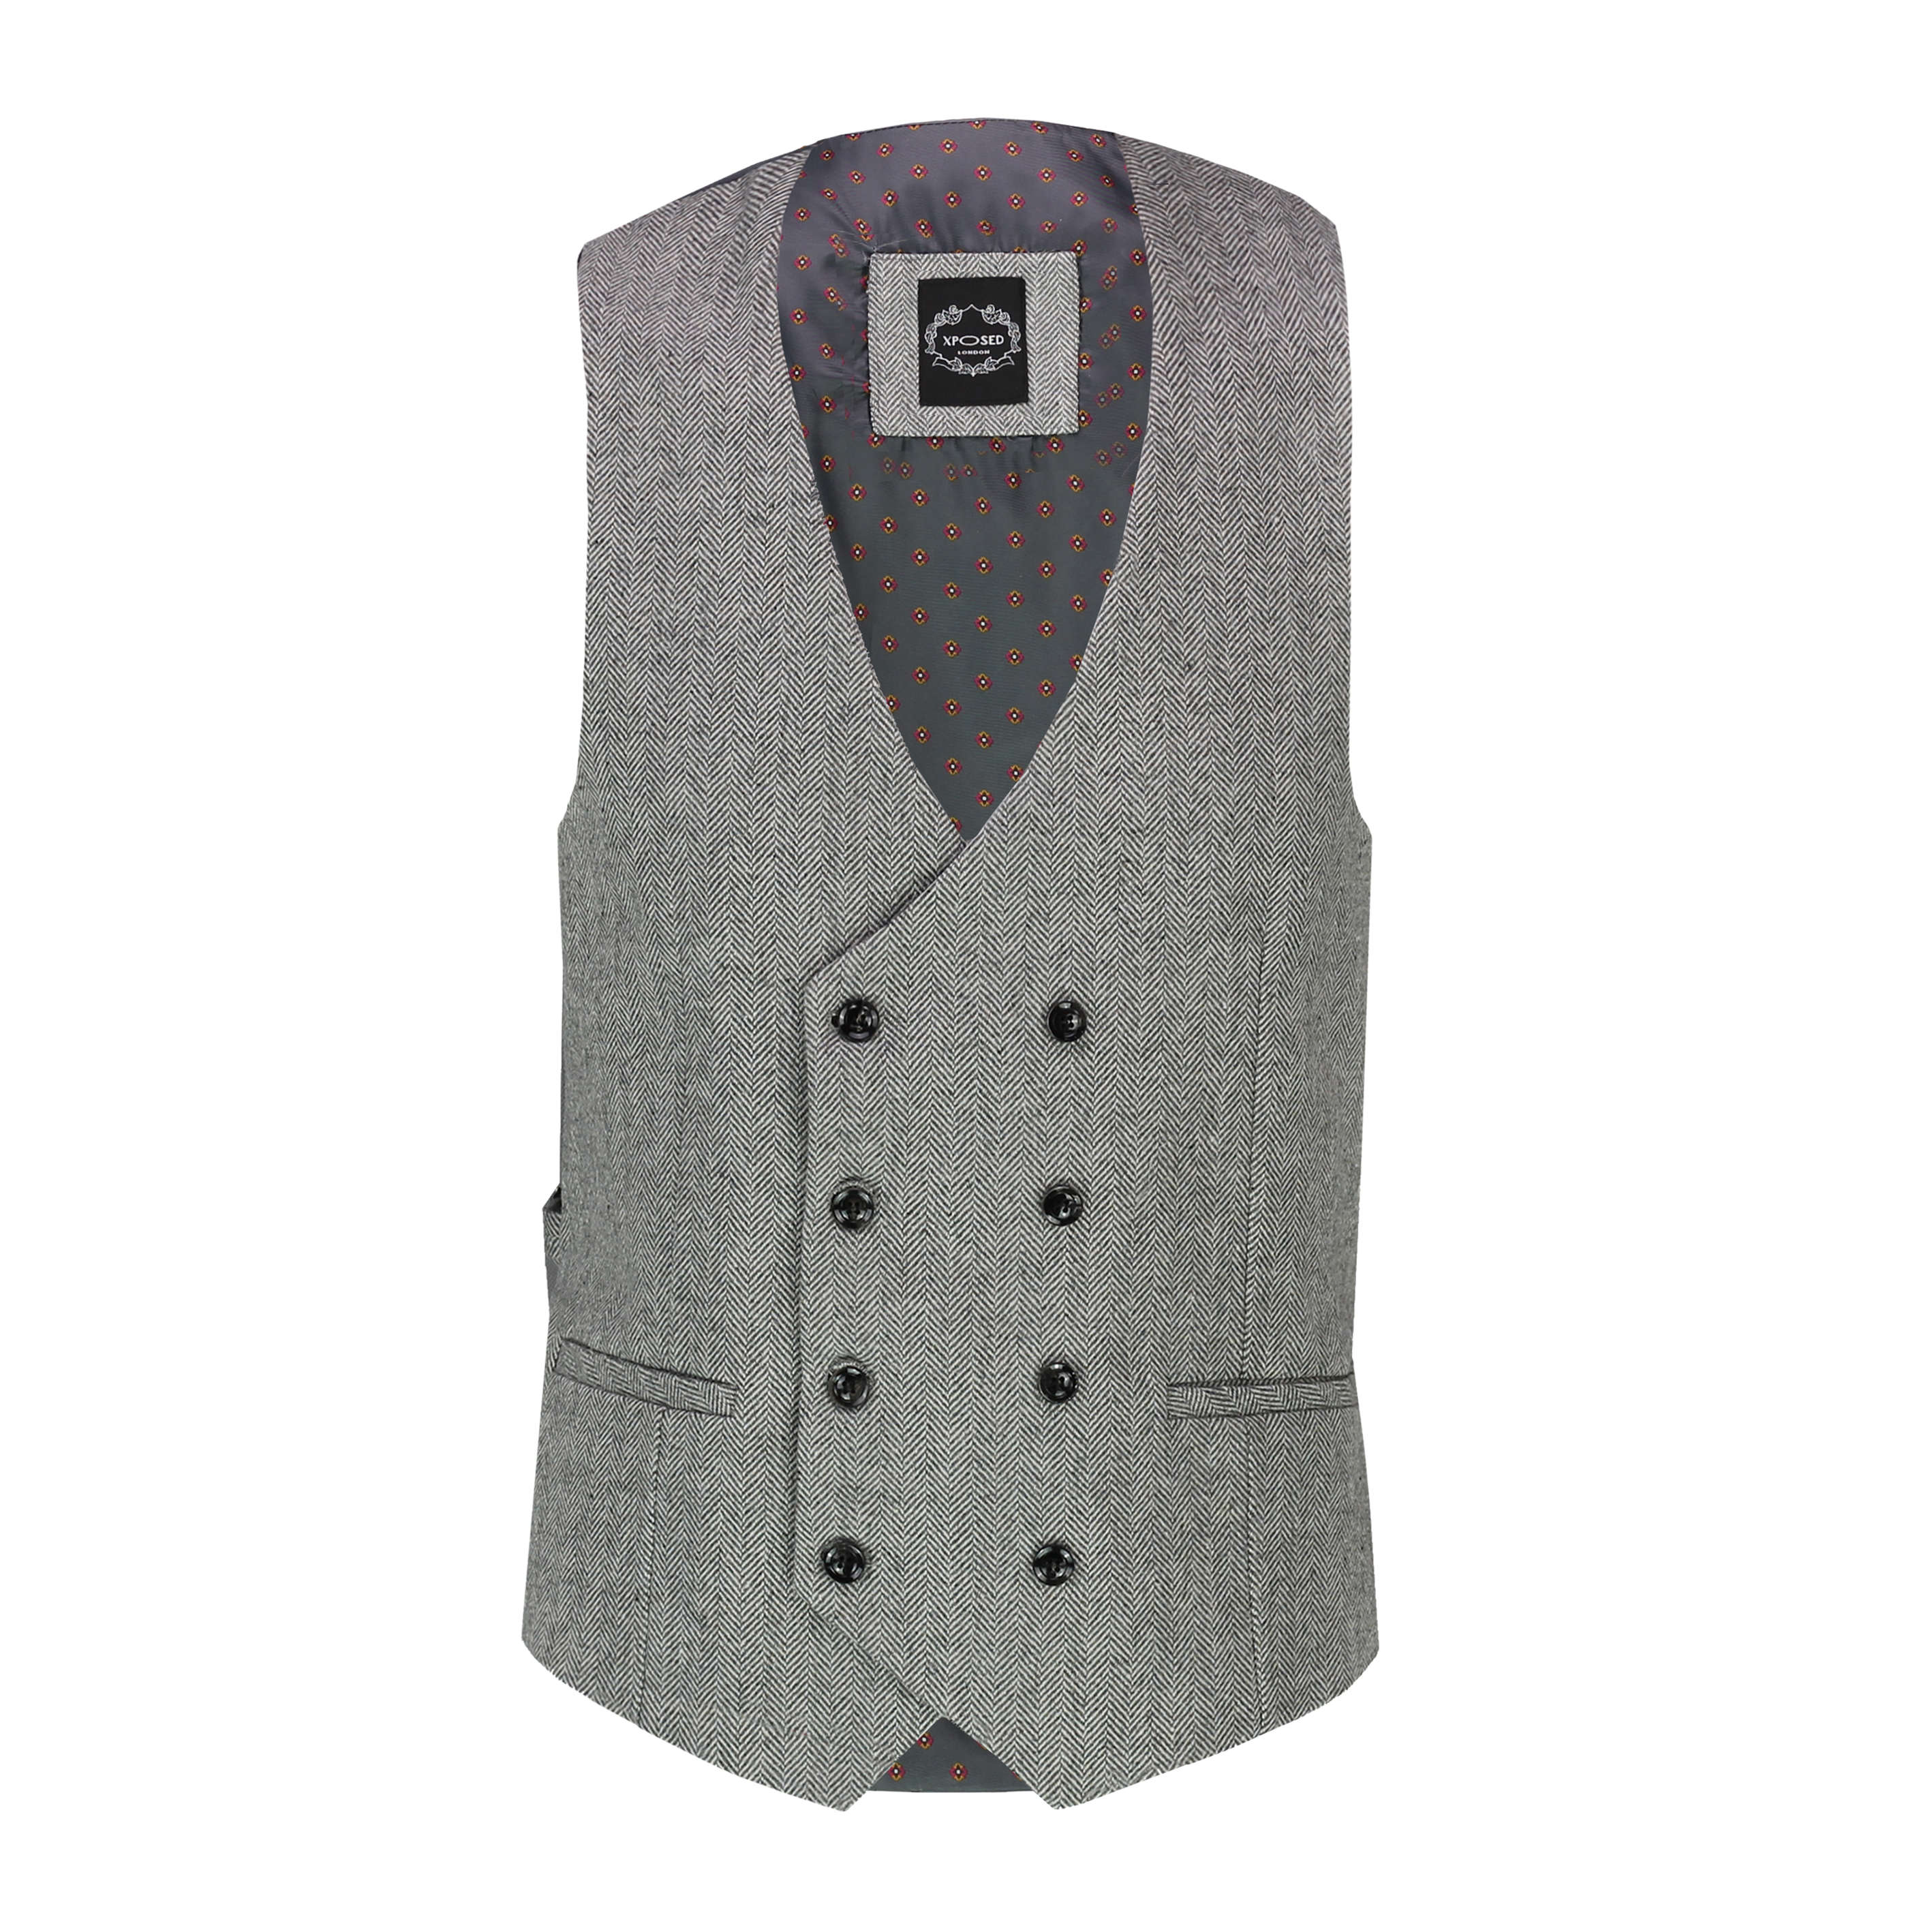 GREY TWEED DOUBLE BREASTED WAISTCOAT – XPOSED